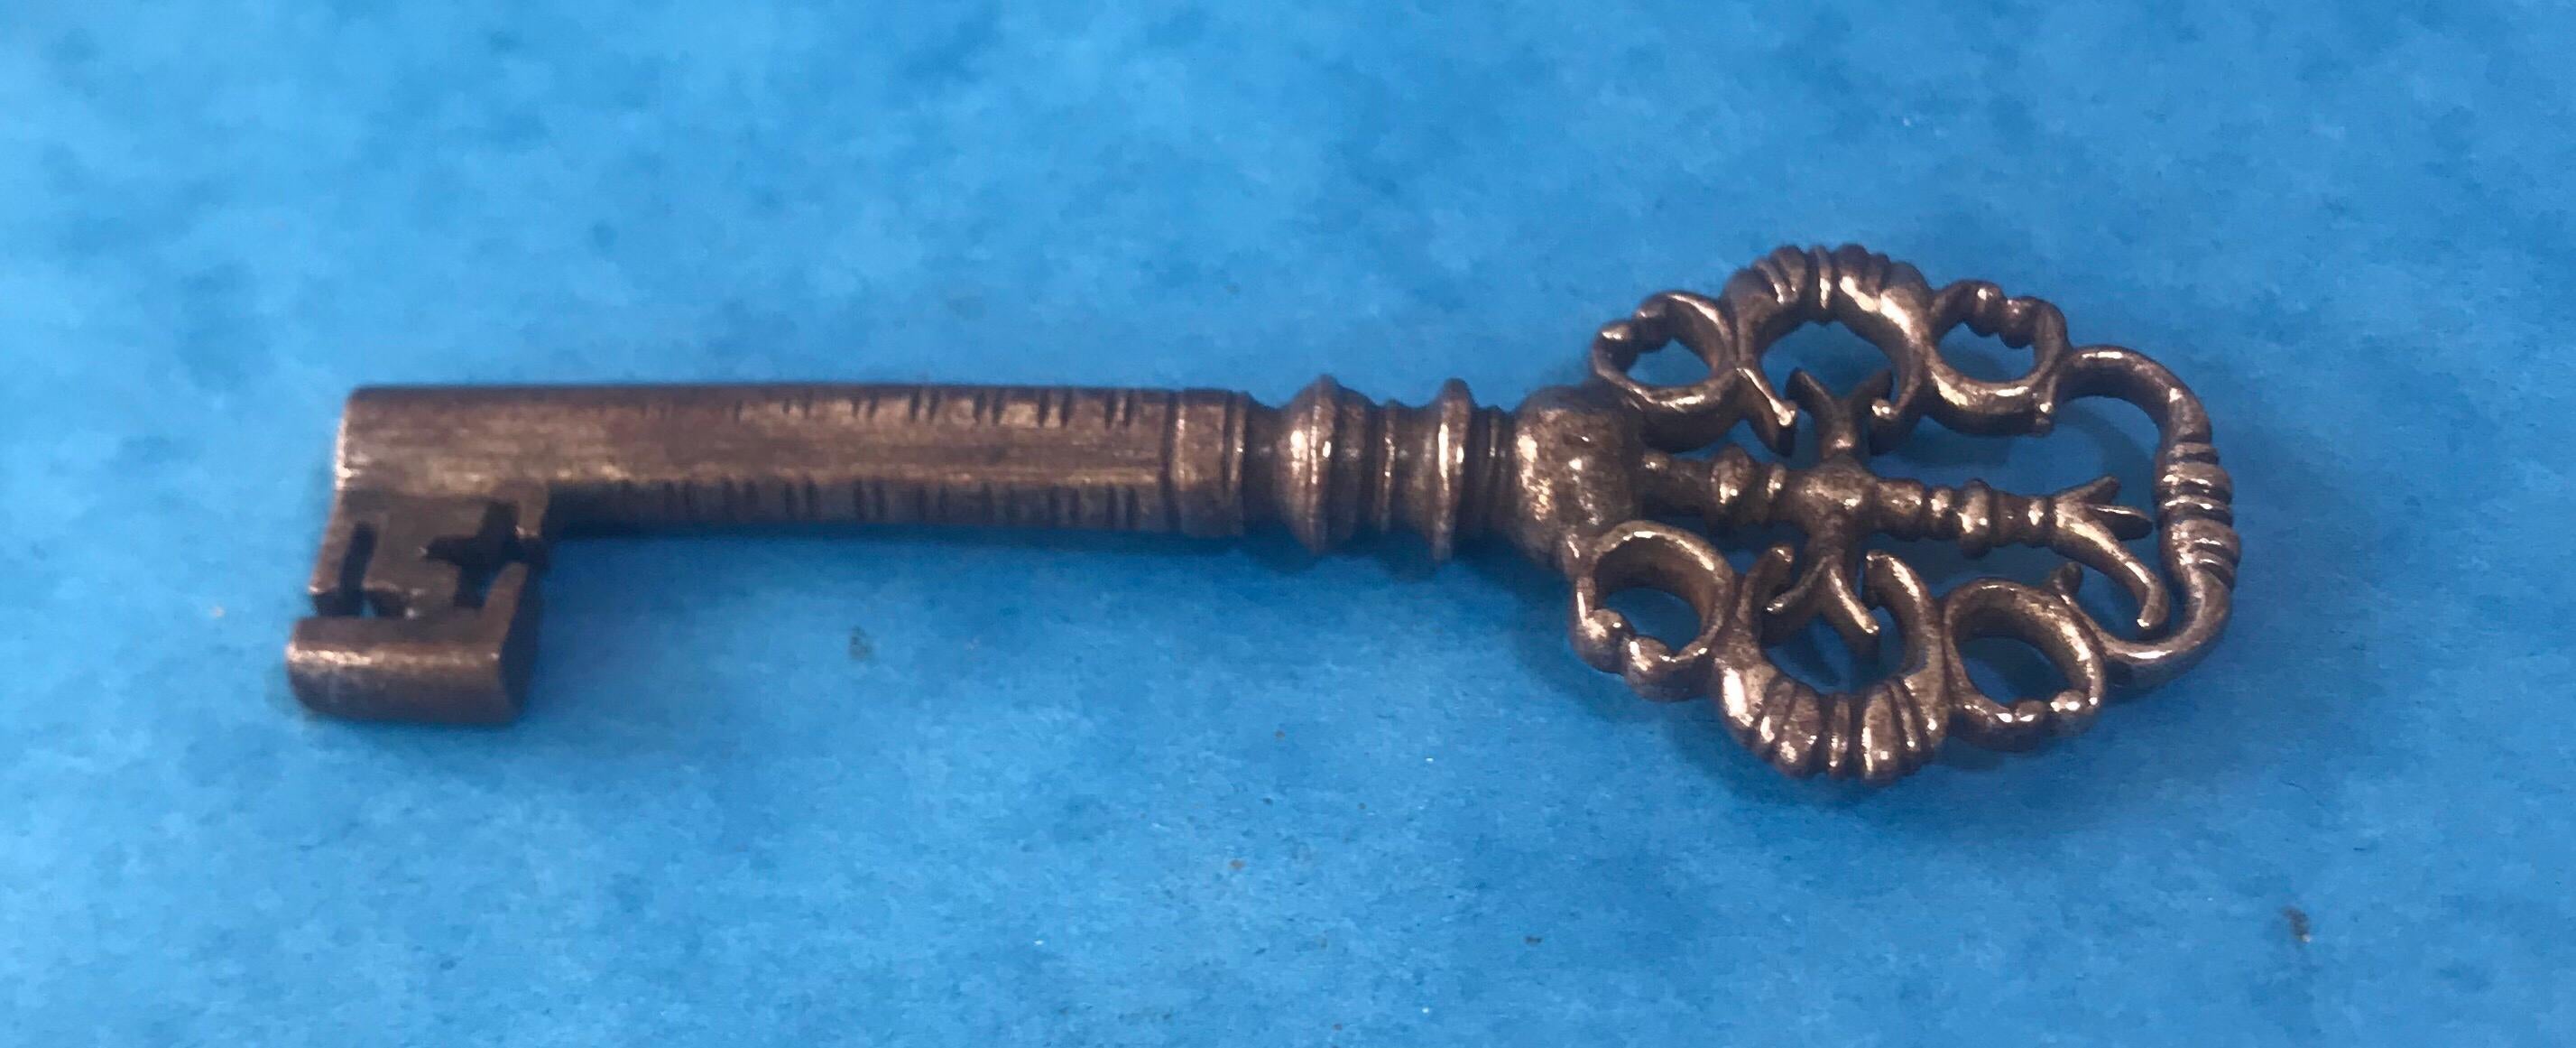 A very unusual and superb steel lantern key, the rare key dates back to circa 1620.
It measures 3 by 1 and stands 8cm high.